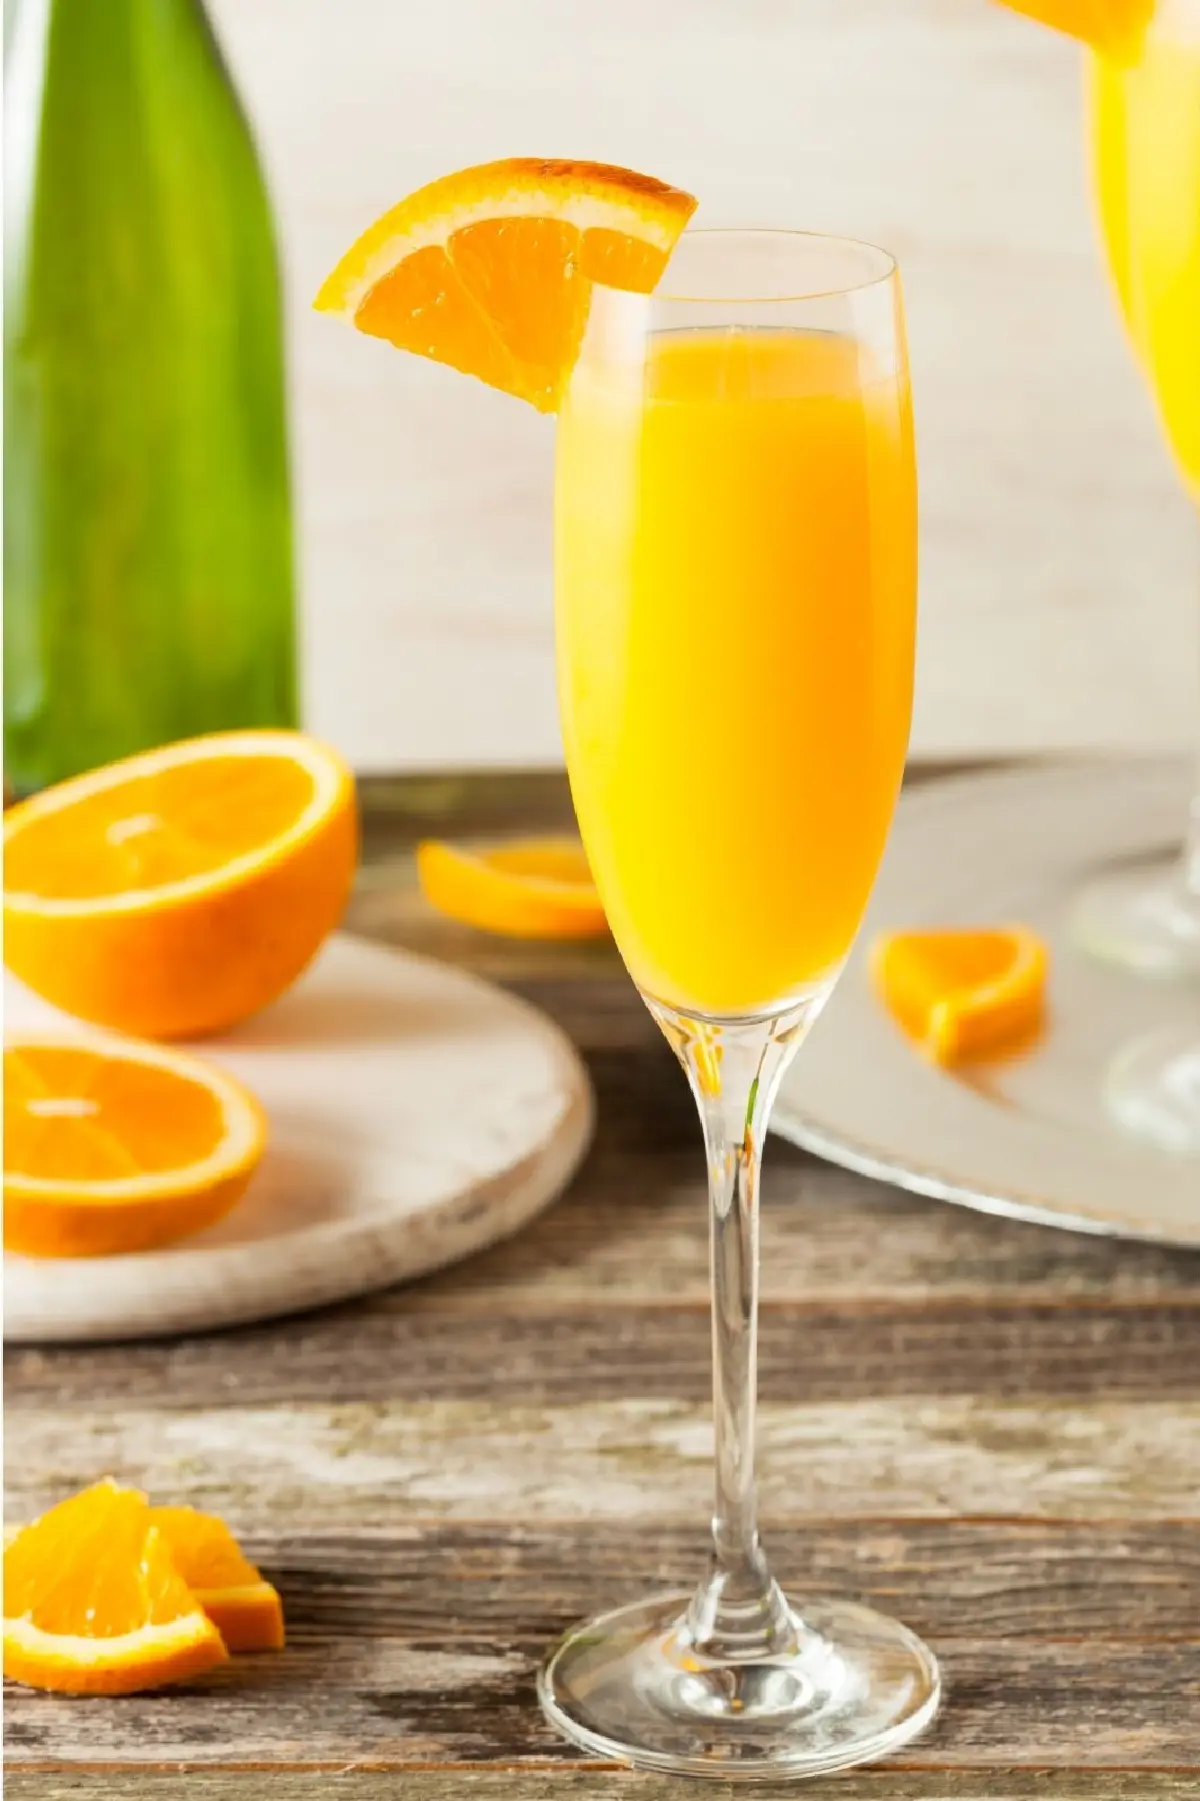 champagne flute filled with a mimosa cocktail and orange wedge garnish